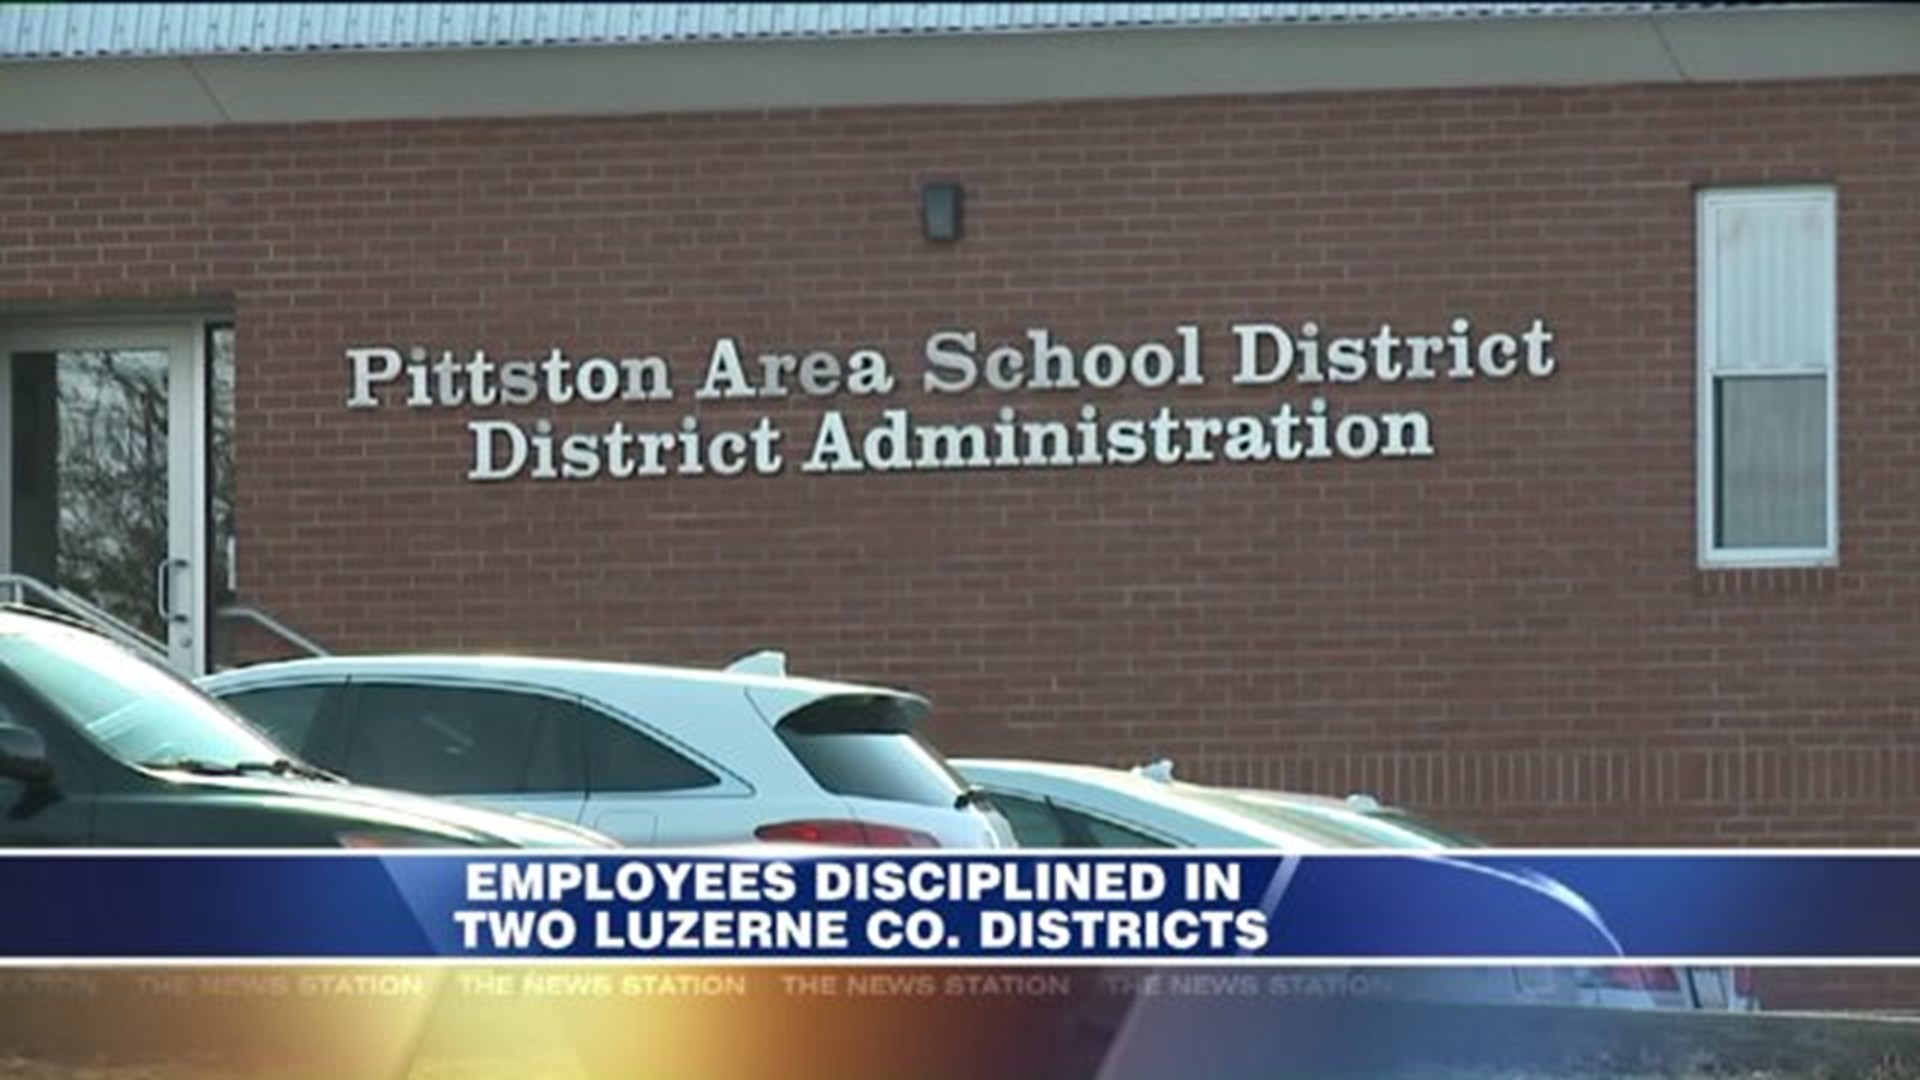 Employees in Two Luzerne County School Districts Disciplined